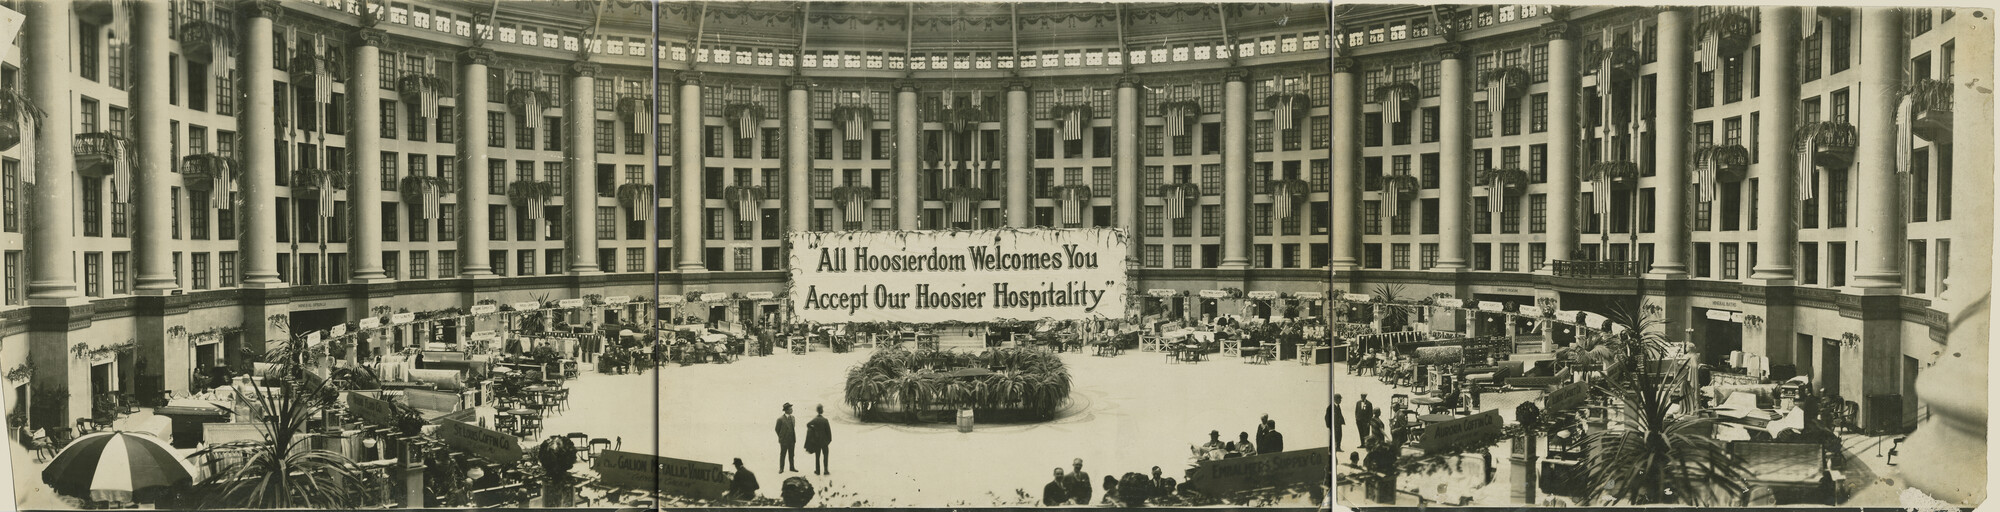 Hoosier Hospitality Conference